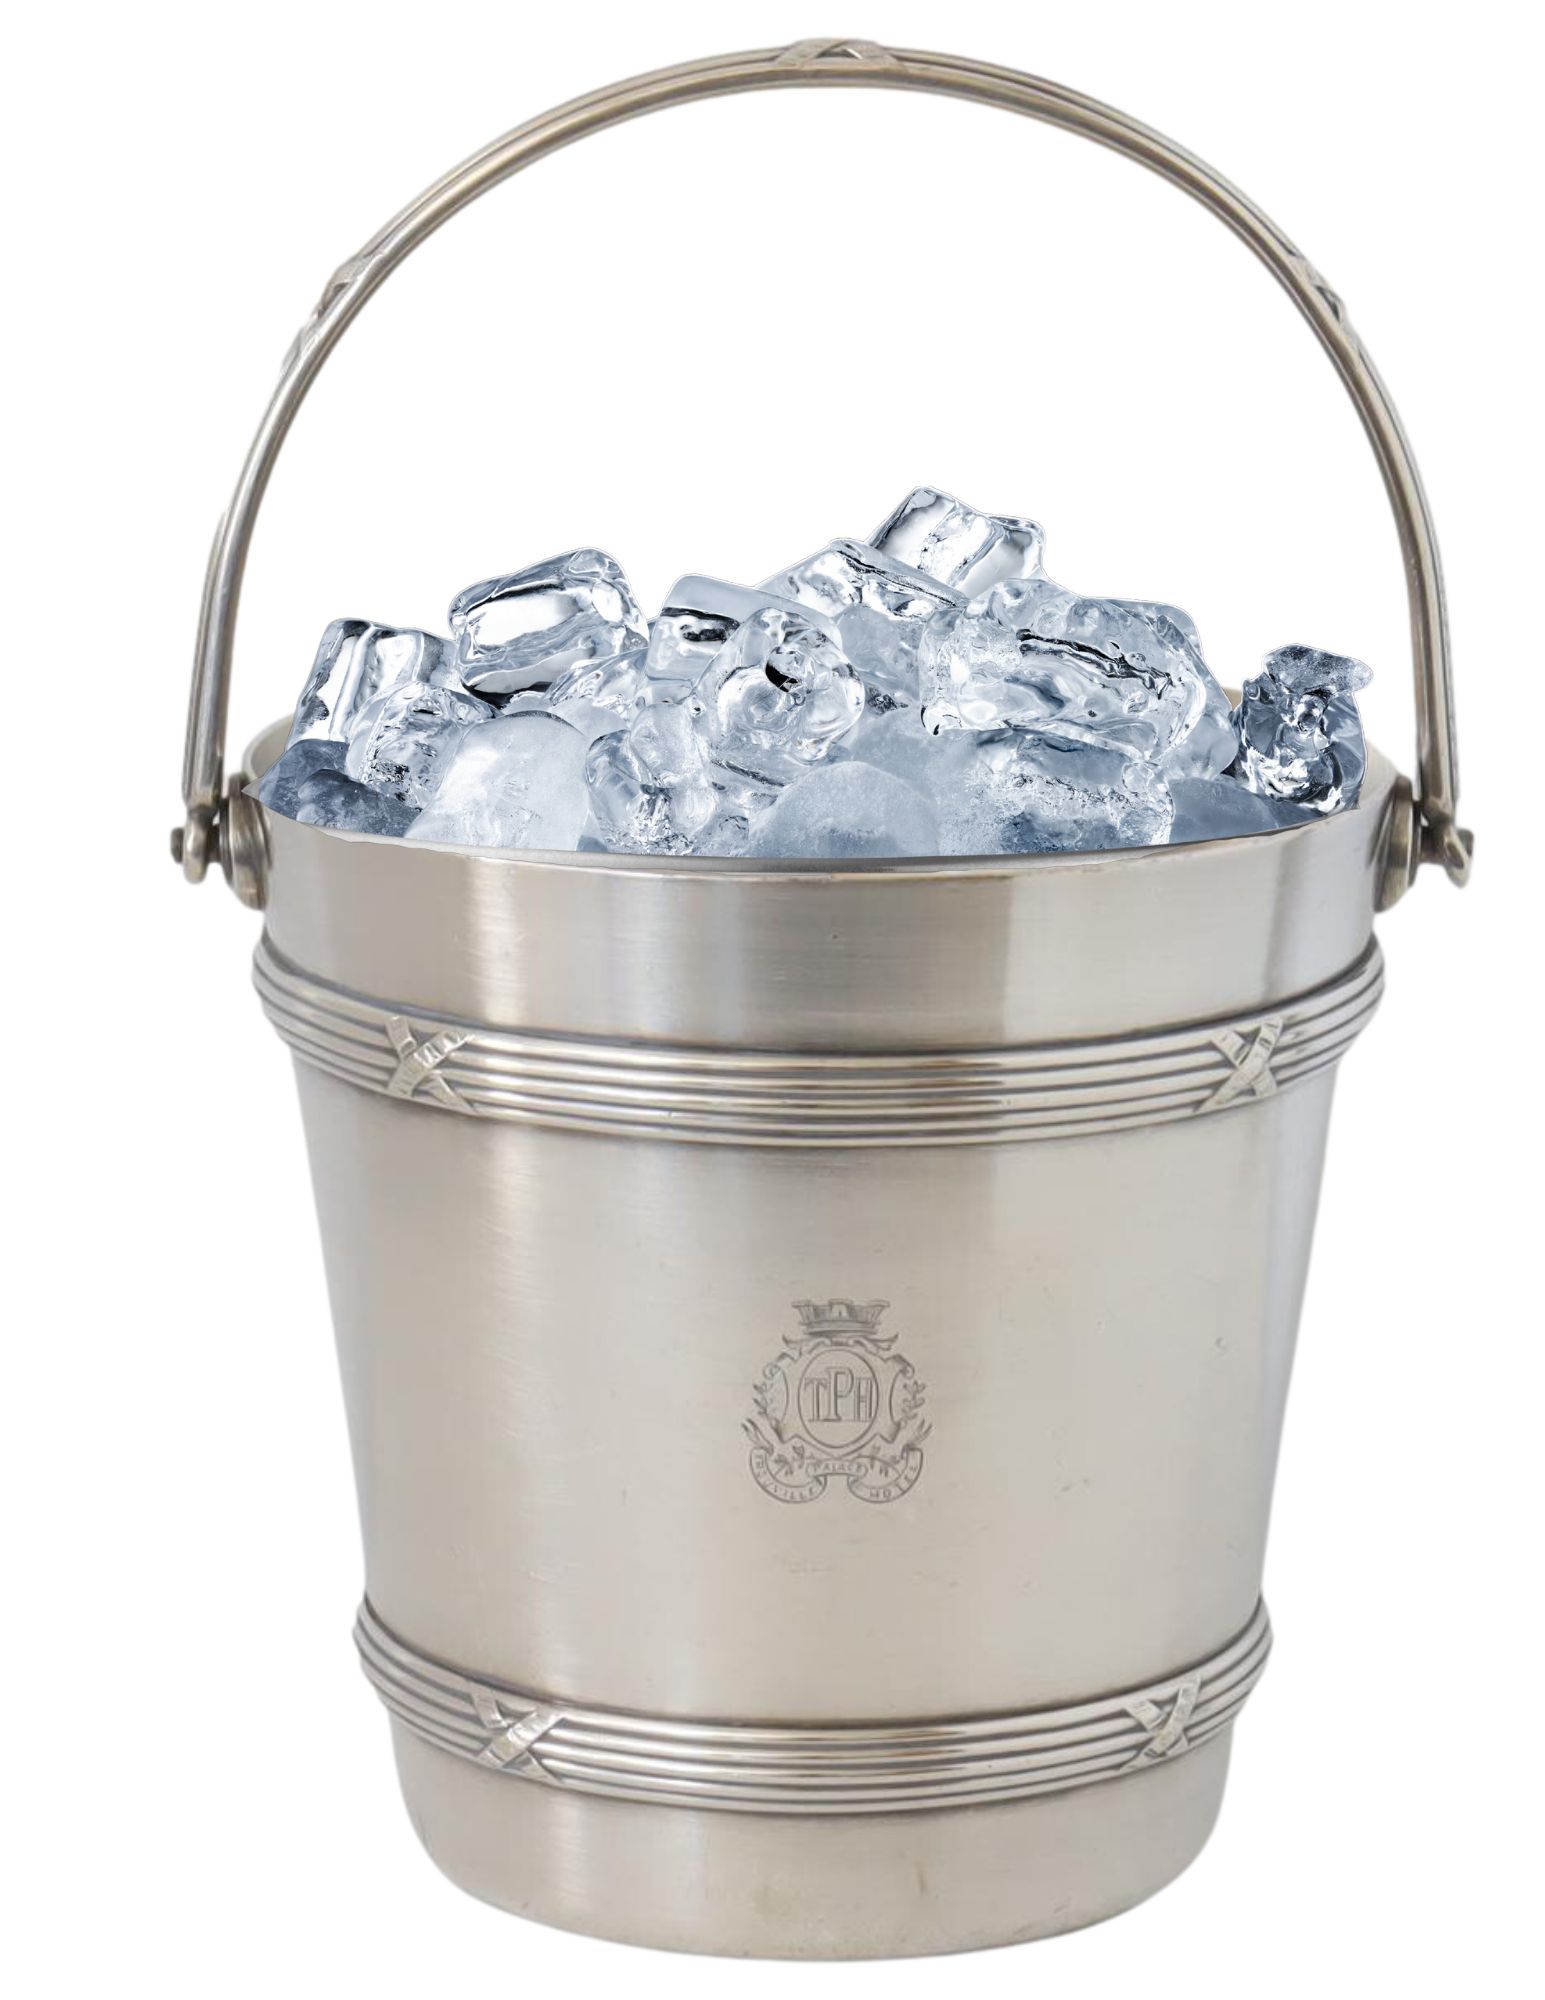 Boulinger Crested Hotel Ware Ice Bucket~P77681594